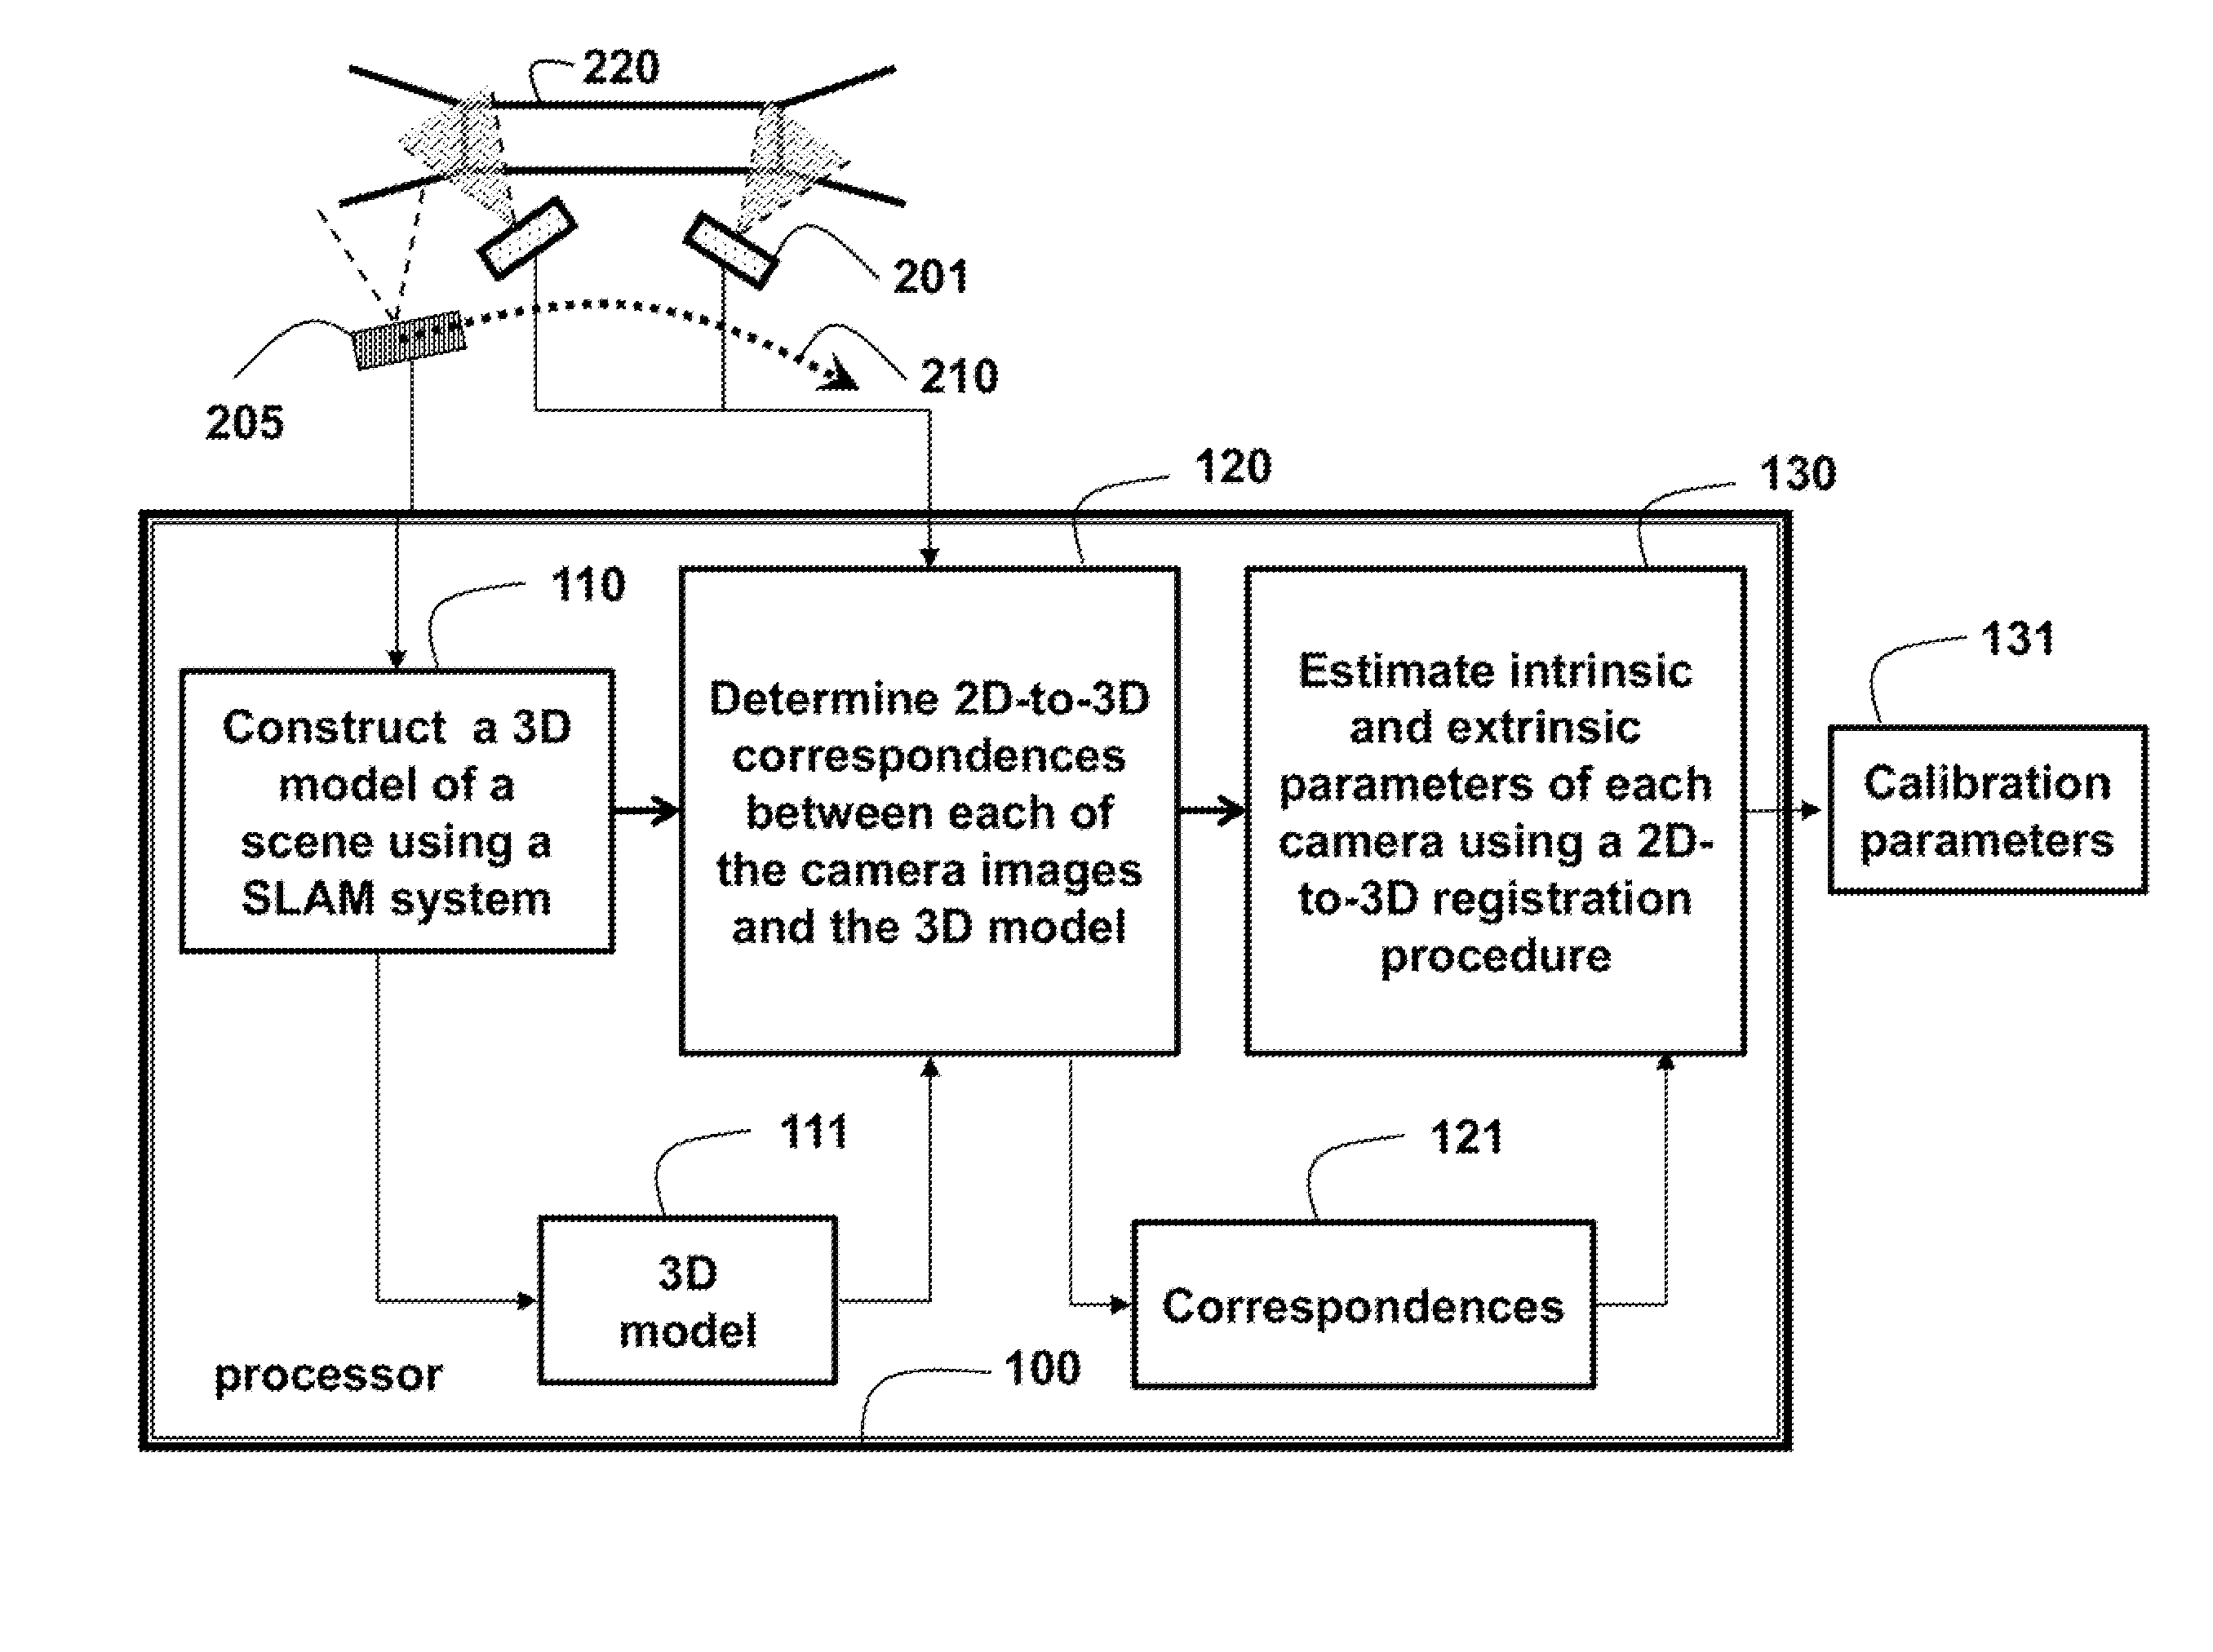 Method for Calibrating Cameras with Non-Overlapping Views